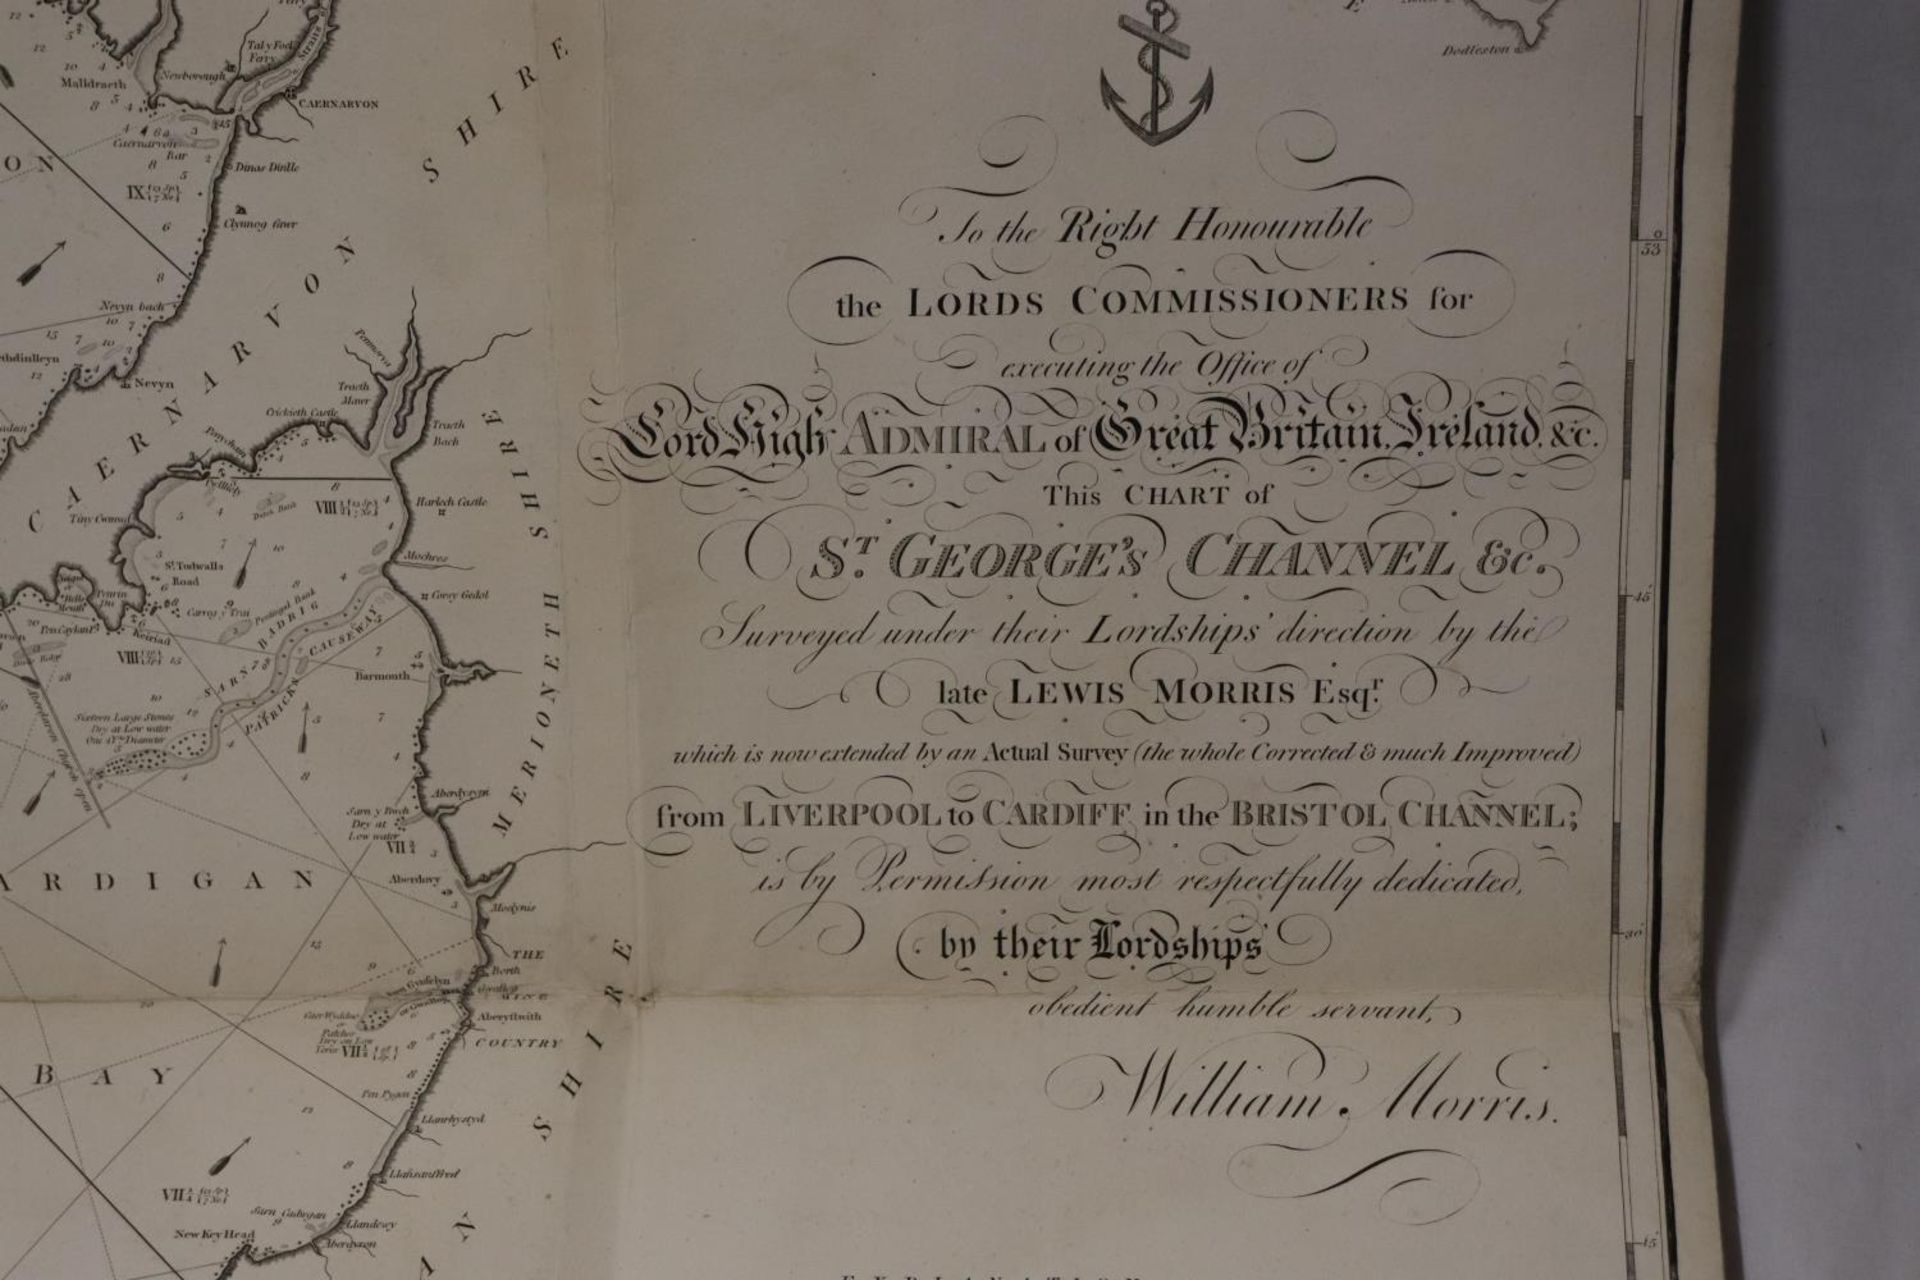 MORRIS (LEWIS) FOLD OUT MAP OF ST.GEORGES CHANNEL PUBLISHED 25TH NOVEMBER 1800 BY WILLIAM MORRIS, 92 - Image 5 of 7